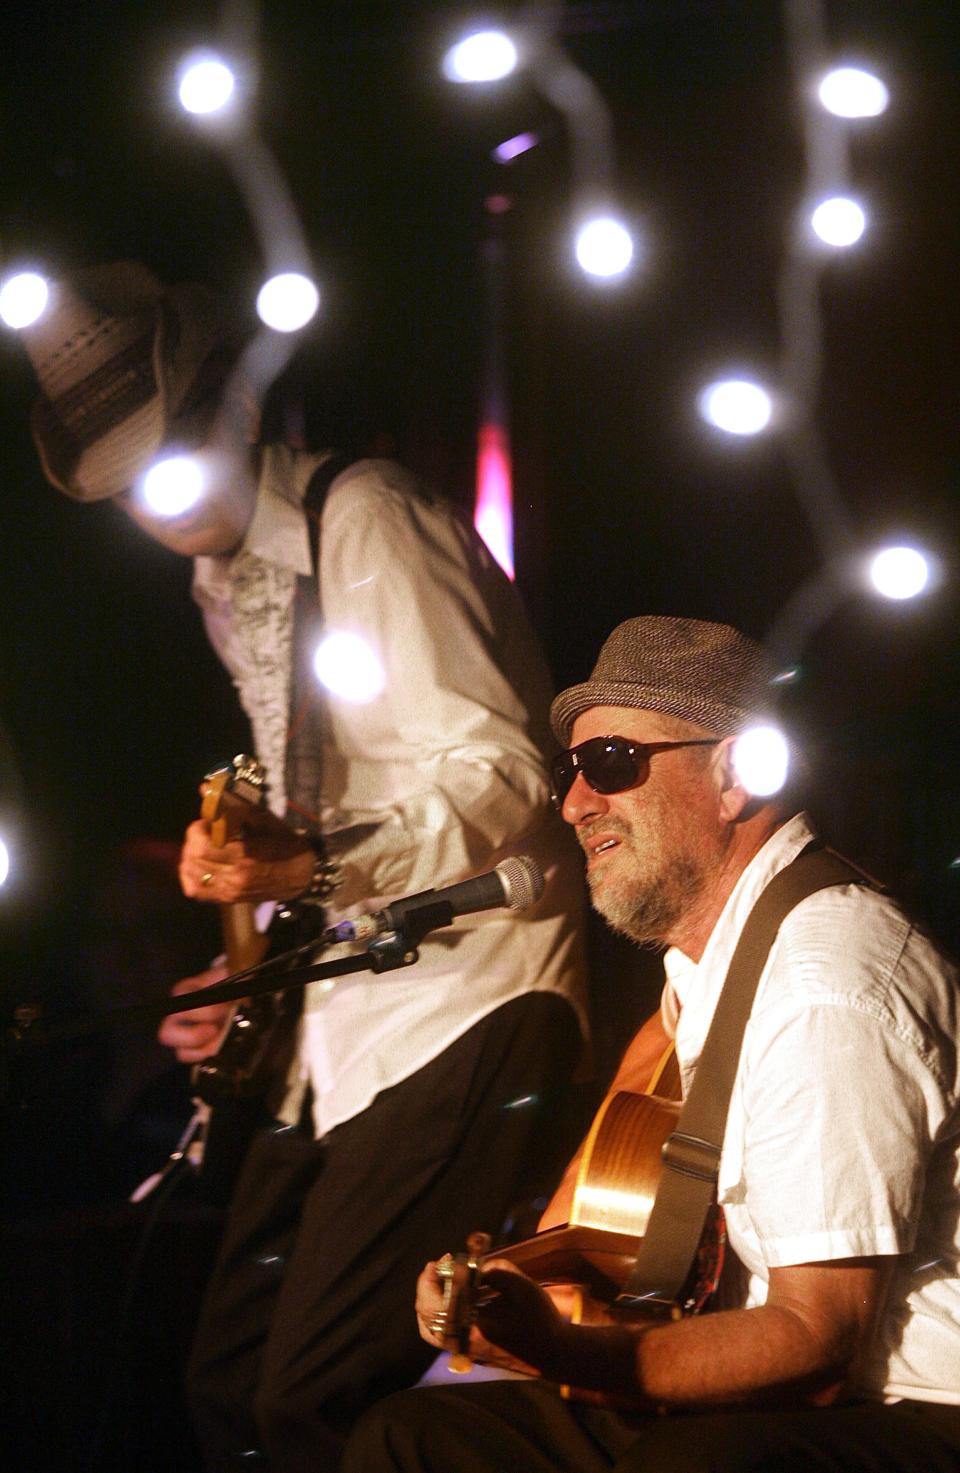 From 2011, artist Greg Brown performs at The Mill.